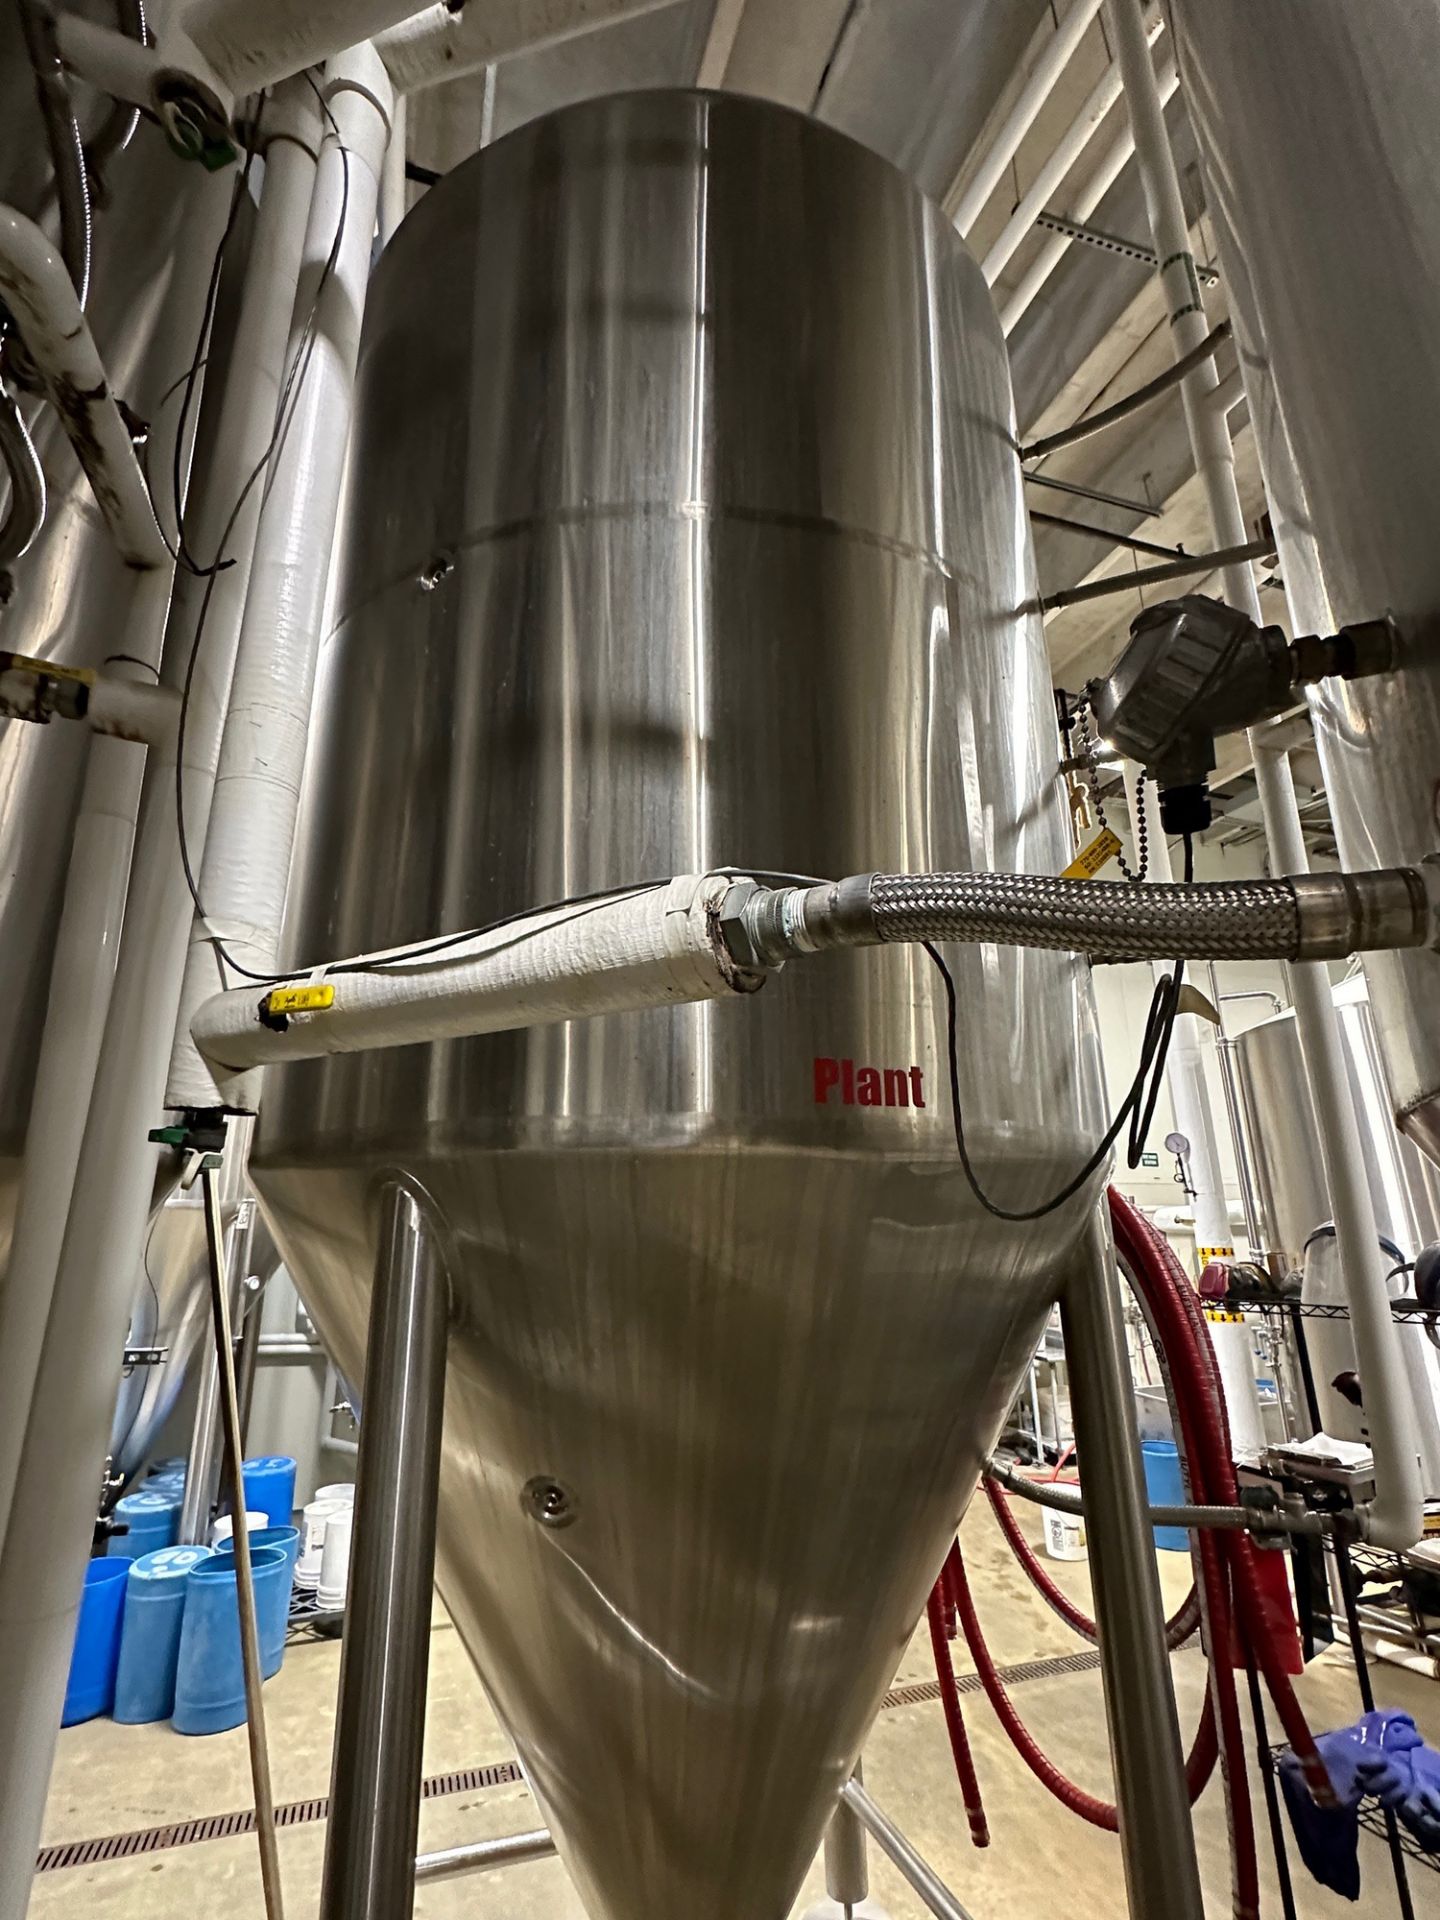 Premier Stainless 80 BBL Stainless Steel Fermentation Tank - Cone Bottom, Glycol Ja | Rig Fee $1850 - Image 3 of 3